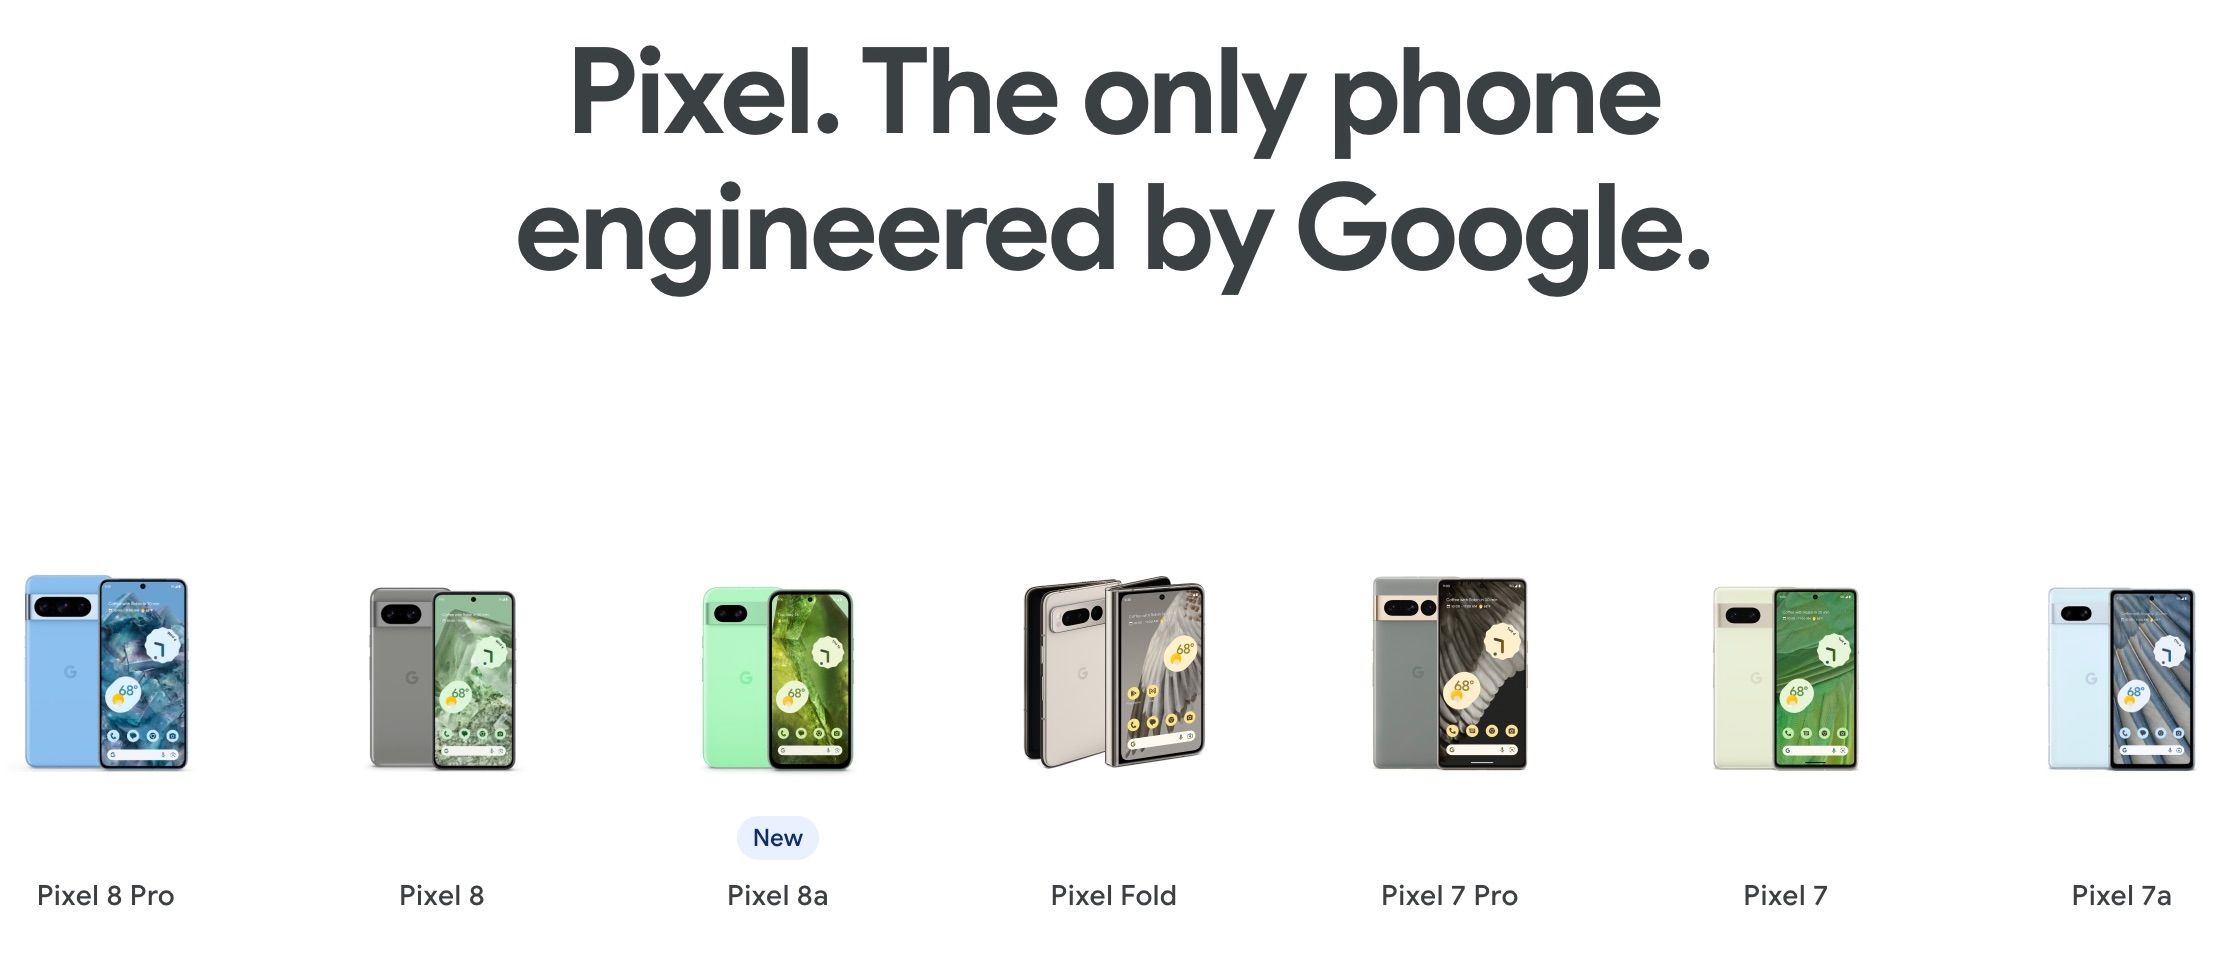 Google's online store showing a selection of phones